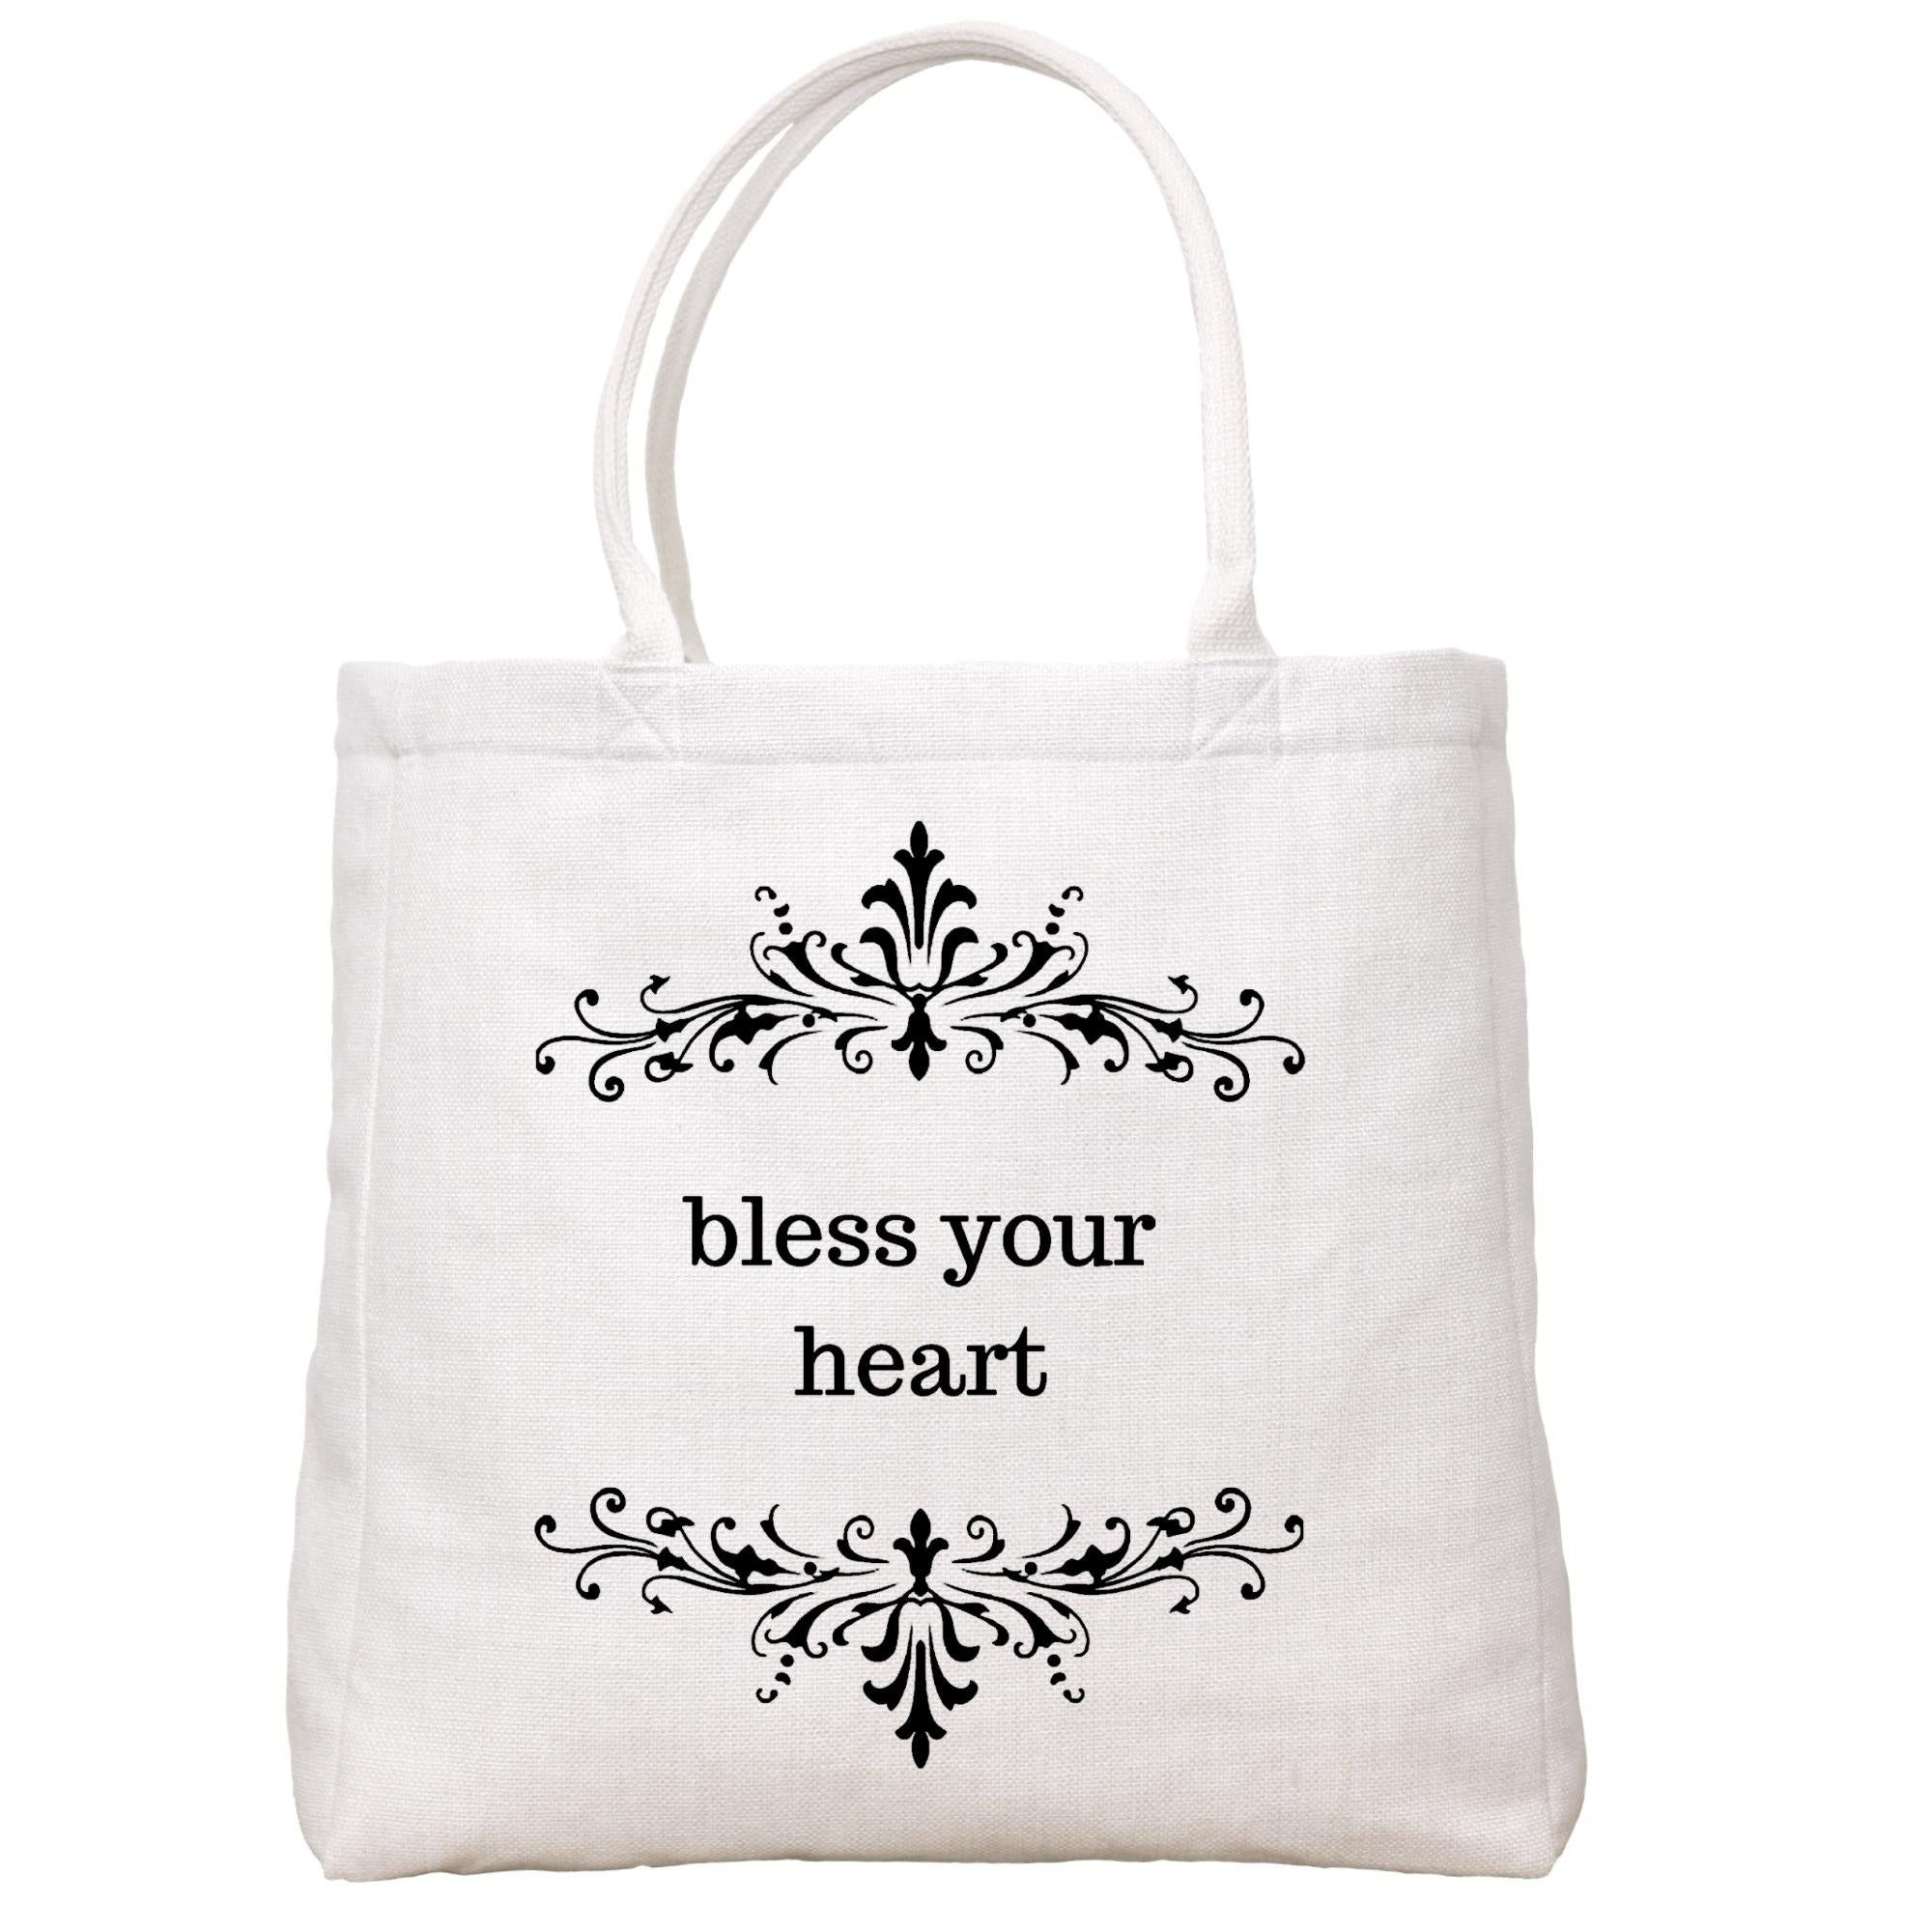 Bless Your Heart Tote Bag Tote Bag - Southern Sisters